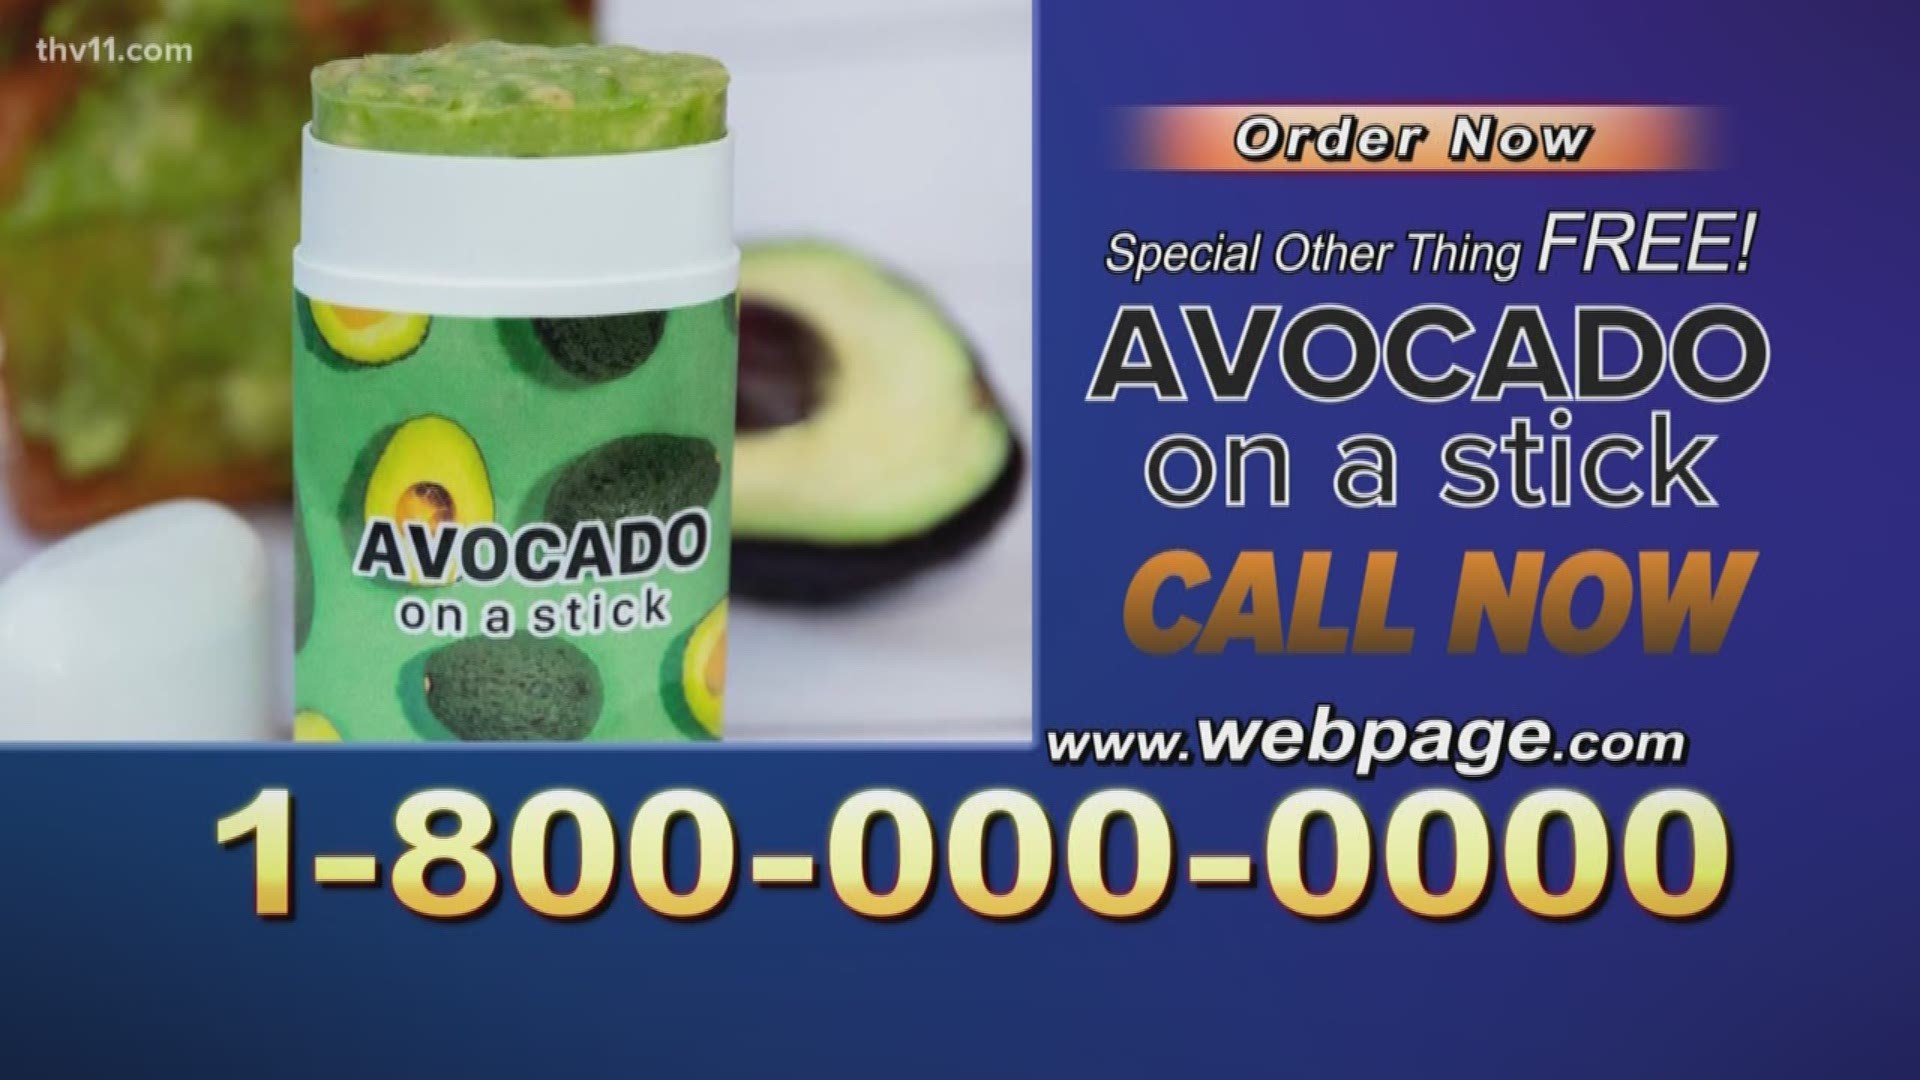 Is avocado on a stick a real thing? Chris Rogers answers several questions viewers asked this week to fuel your curiosity.